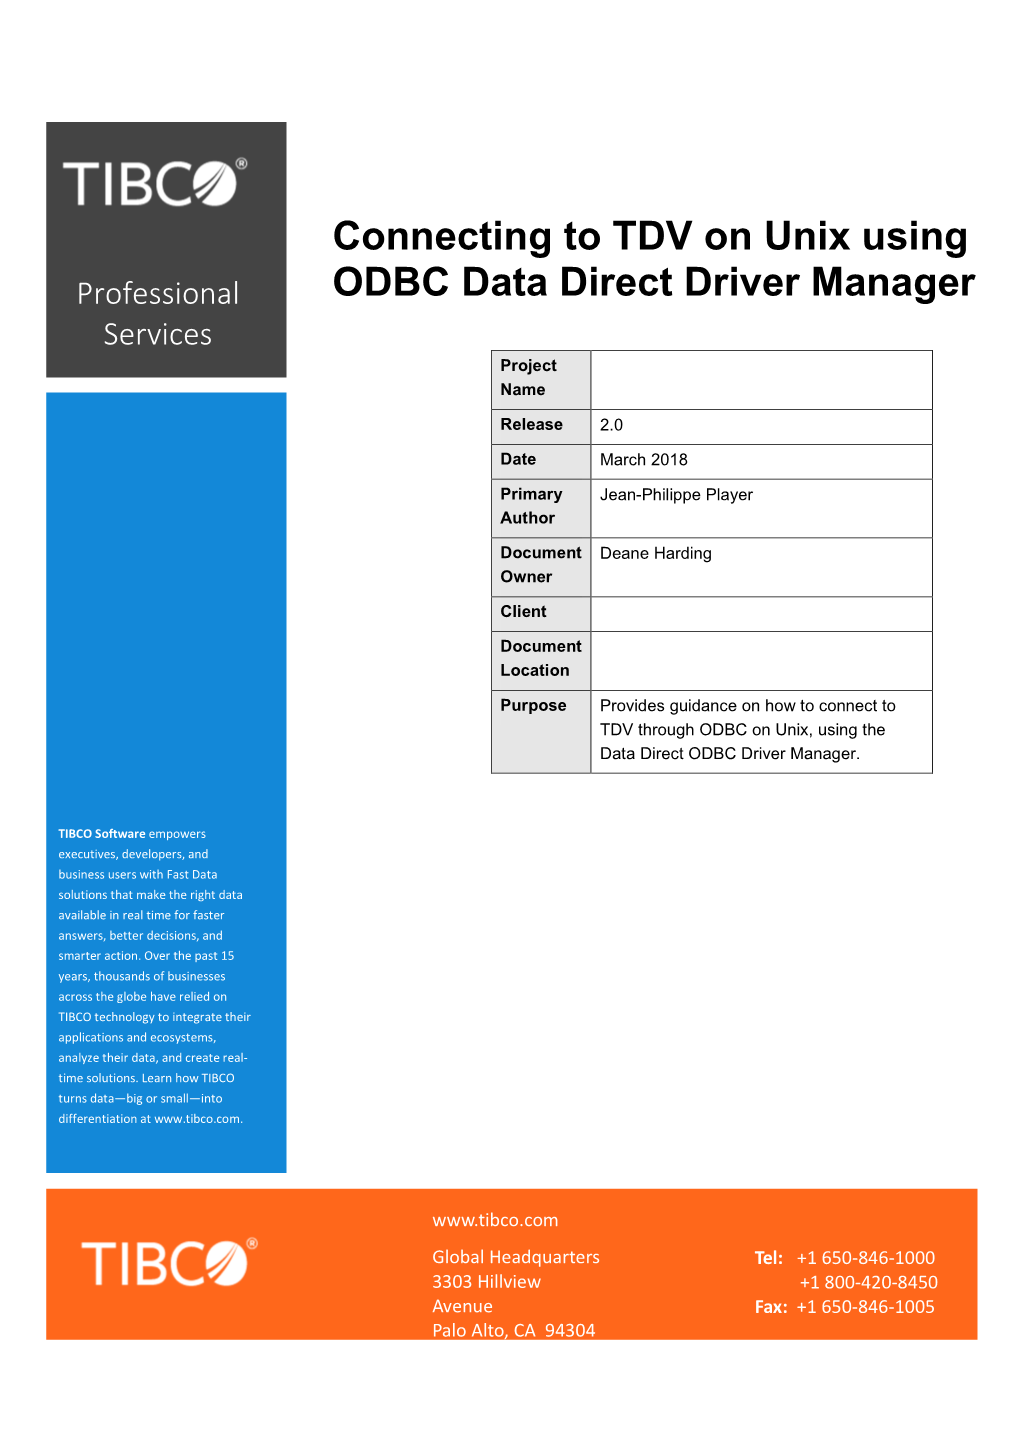 Connecting to TDV on Unix Using ODBC Data Direct Driver Manager